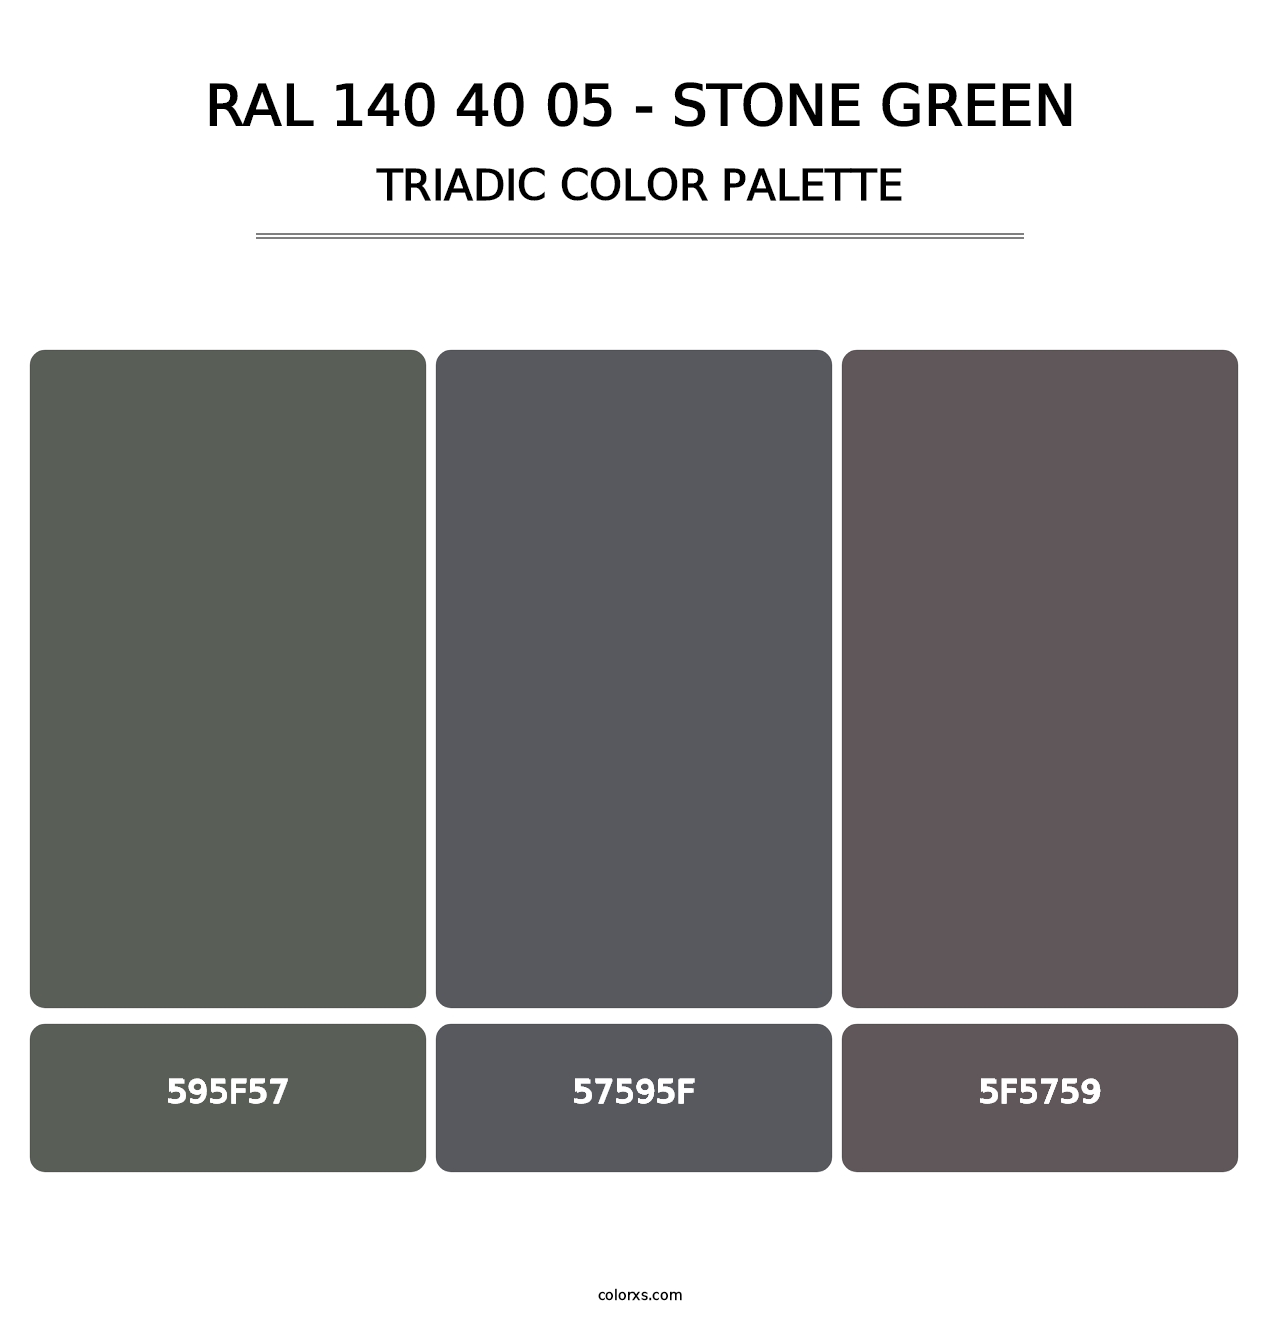 RAL 140 40 05 - Stone Green - Triadic Color Palette